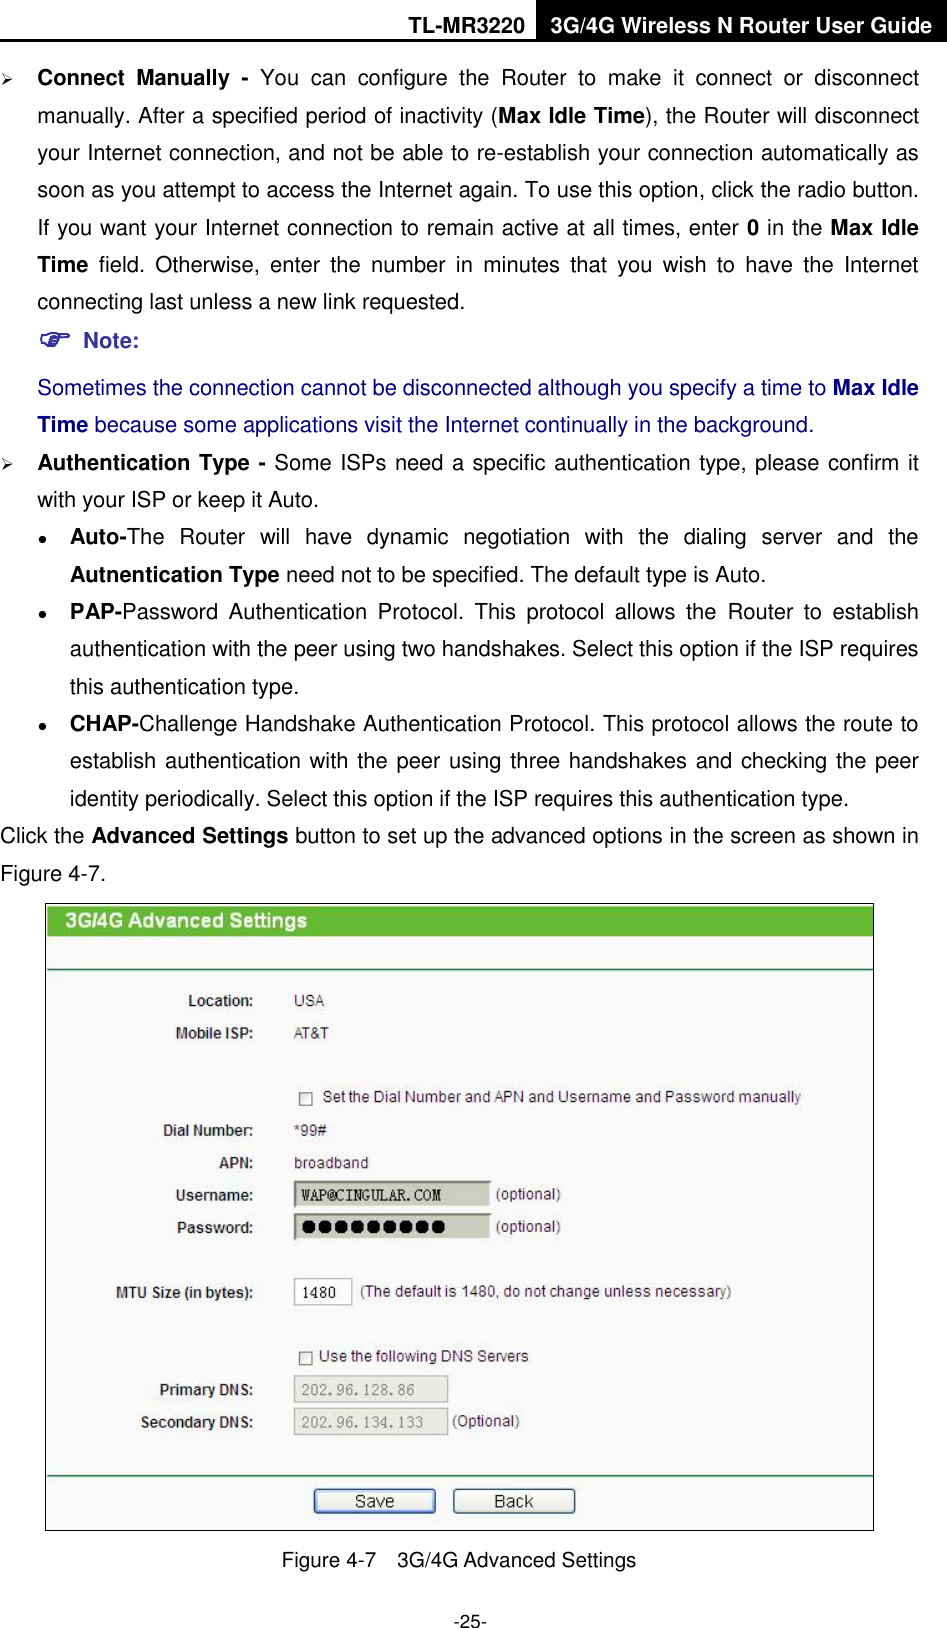 TL-MR3220 3G/4G Wireless N Router User Guide  -25-  Connect  Manually -  You  can  configure  the  Router  to  make  it  connect  or  disconnect manually. After a specified period of inactivity (Max Idle Time), the Router will disconnect your Internet connection, and not be able to re-establish your connection automatically as soon as you attempt to access the Internet again. To use this option, click the radio button. If you want your Internet connection to remain active at all times, enter 0 in the Max Idle Time  field.  Otherwise,  enter  the  number  in  minutes  that  you  wish  to  have  the  Internet connecting last unless a new link requested.  Note: Sometimes the connection cannot be disconnected although you specify a time to Max Idle Time because some applications visit the Internet continually in the background.  Authentication Type - Some ISPs need a specific authentication type, please confirm it with your ISP or keep it Auto.  Auto-The  Router  will  have  dynamic  negotiation  with  the  dialing  server  and  the Autnentication Type need not to be specified. The default type is Auto.  PAP-Password  Authentication  Protocol.  This  protocol  allows  the  Router  to  establish authentication with the peer using two handshakes. Select this option if the ISP requires this authentication type.  CHAP-Challenge Handshake Authentication Protocol. This protocol allows the route to establish authentication with the peer using three handshakes and checking the peer identity periodically. Select this option if the ISP requires this authentication type. Click the Advanced Settings button to set up the advanced options in the screen as shown in Figure 4-7.  Figure 4-7  3G/4G Advanced Settings 